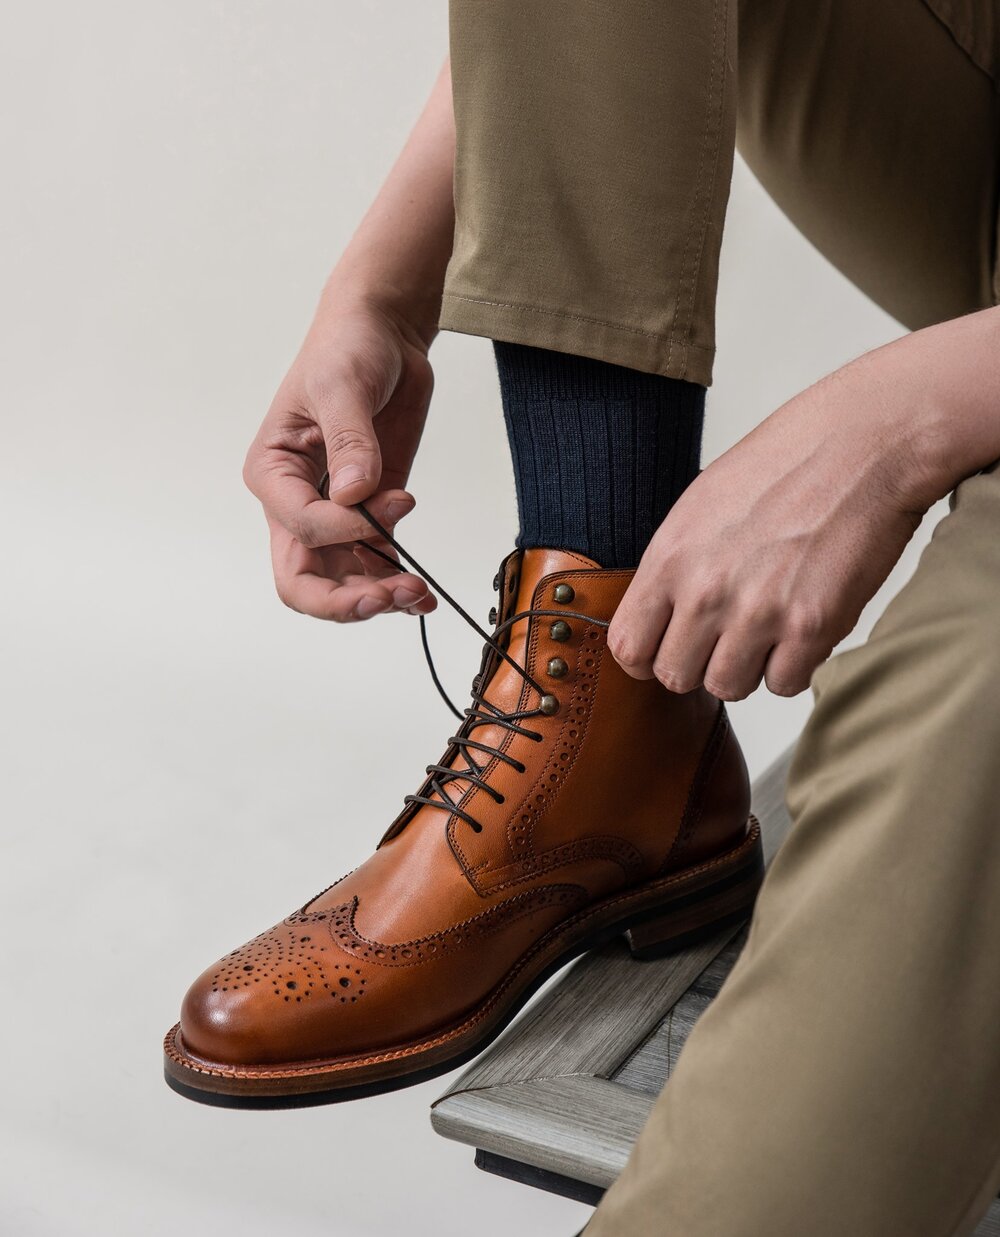 12 Sustainable Men's Shoe Brands Your Feet And The Planet Will Love Chic